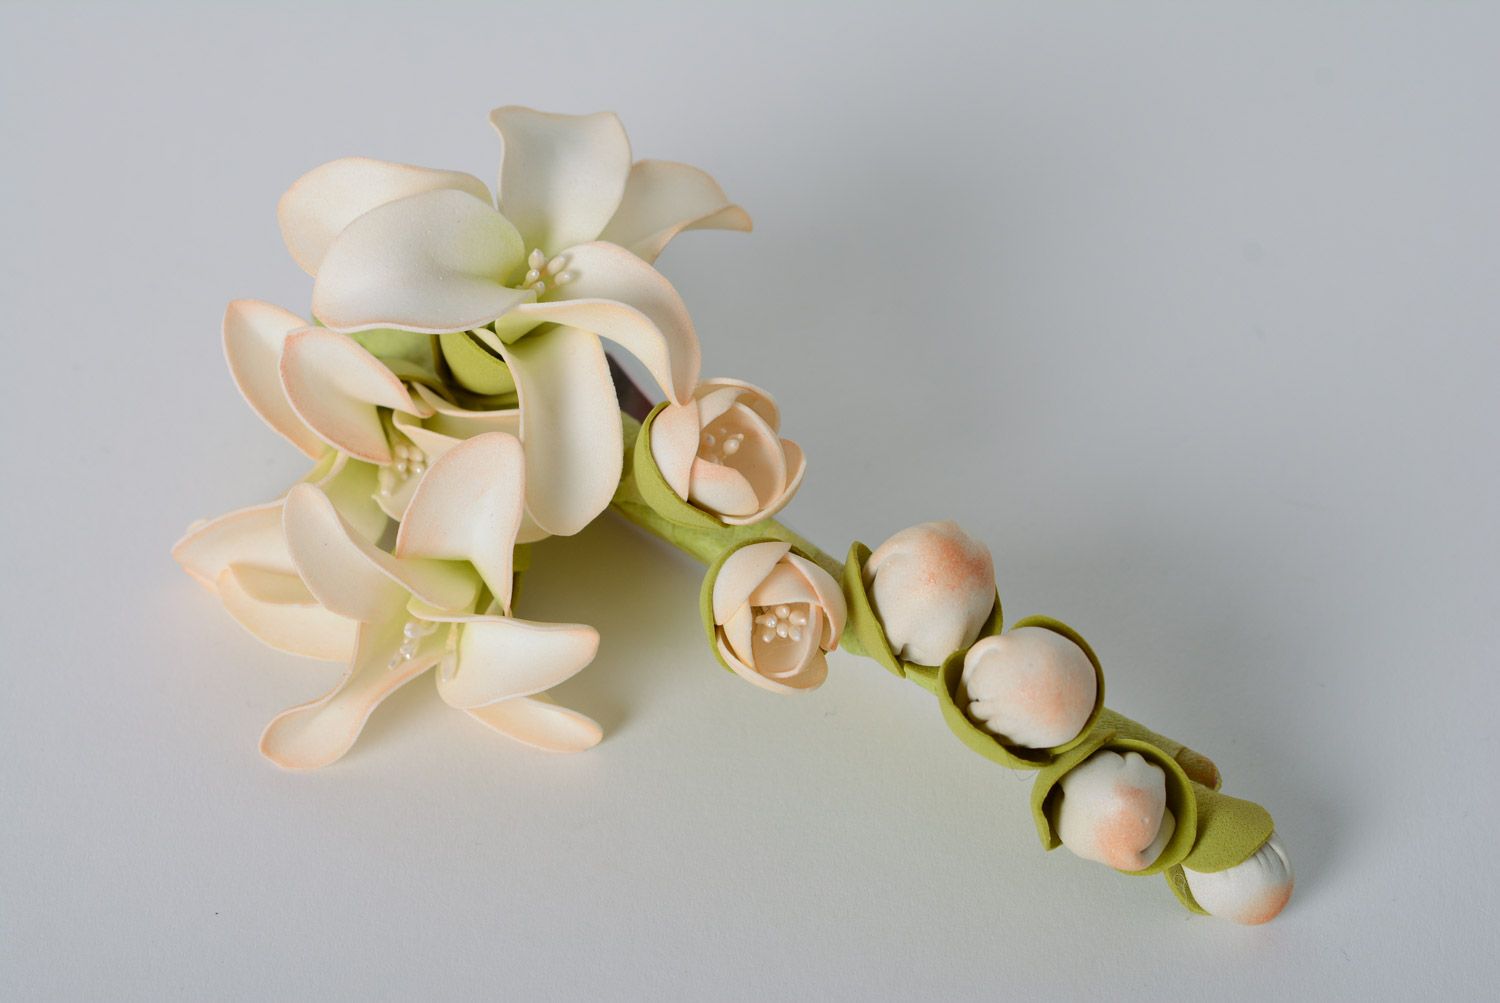 Handmade beautiful designer hairpin with large flowers made of foamiran hair accessories photo 1